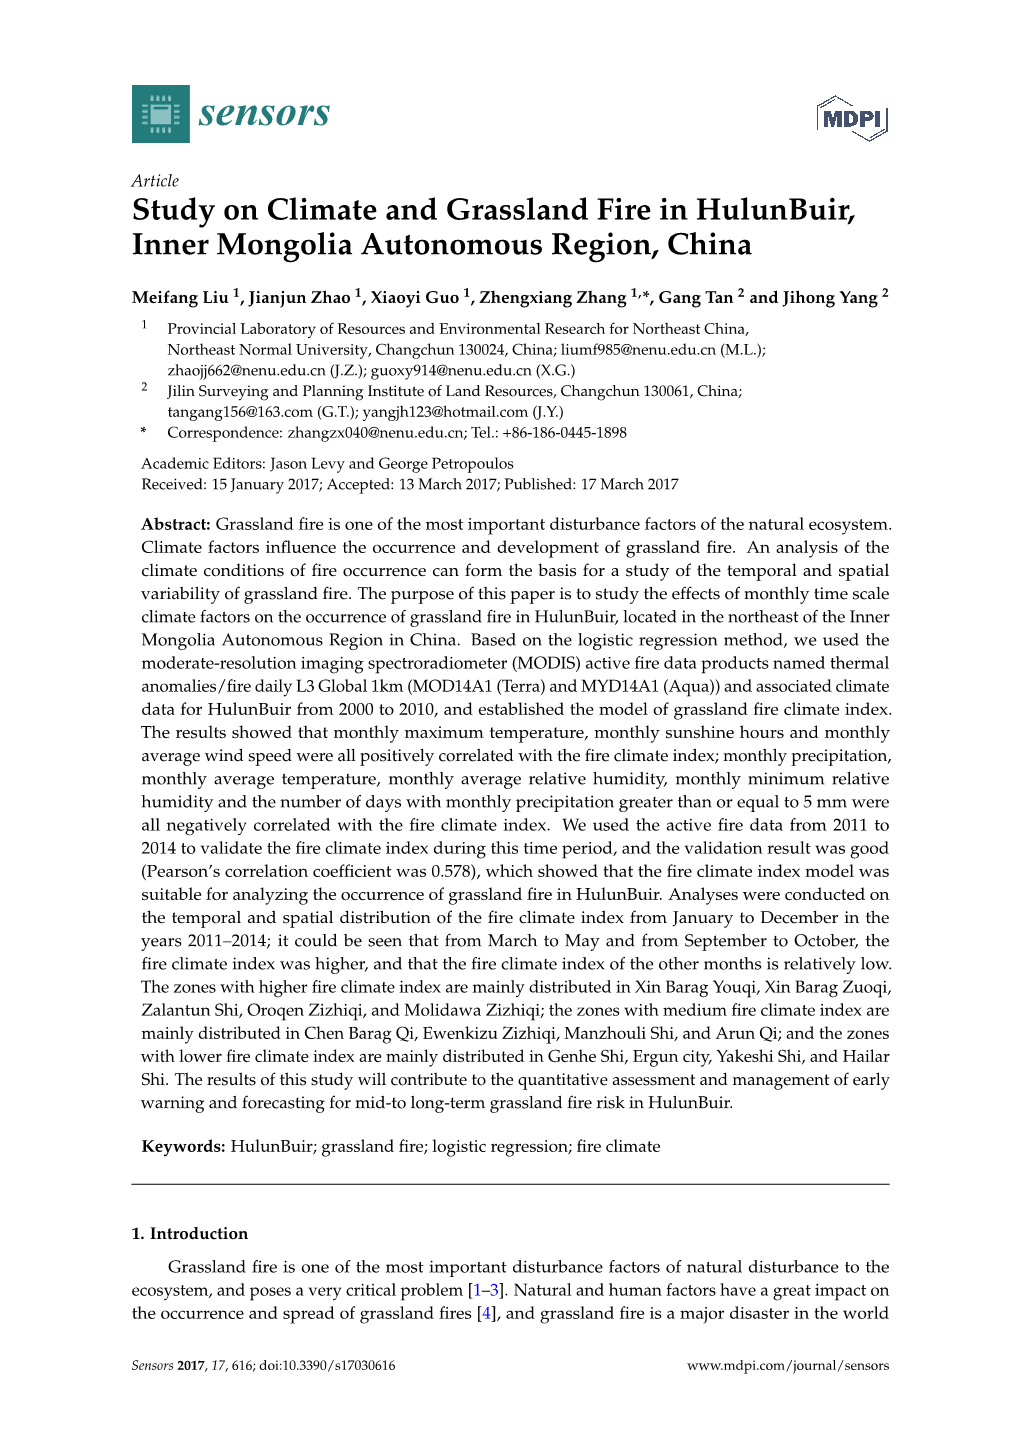 Study on Climate and Grassland Fire in Hulunbuir, Inner Mongolia Autonomous Region, China